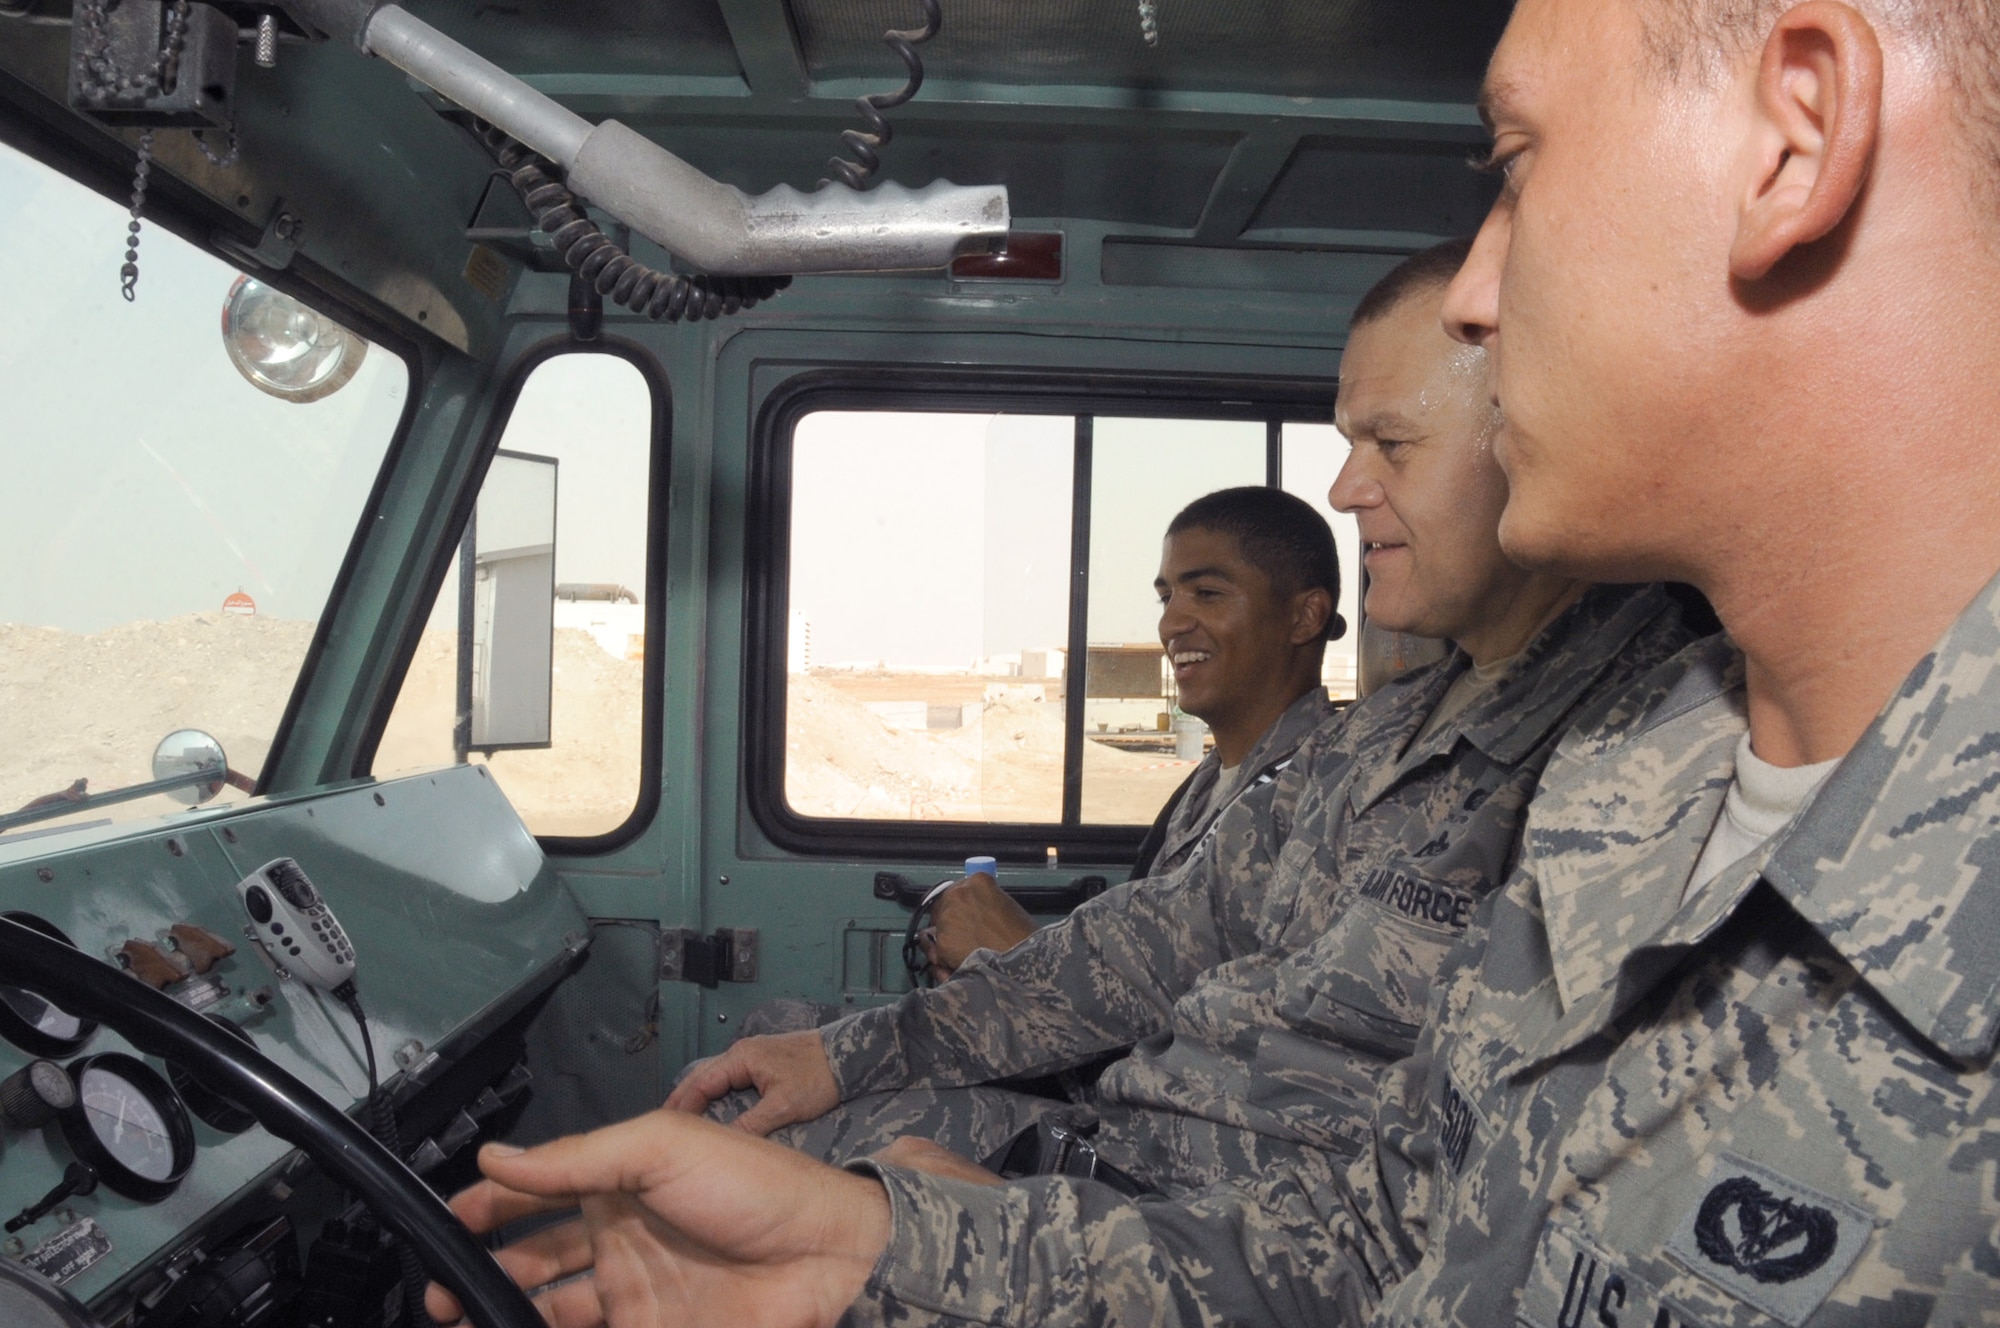 Senior Airman Joshua Thompson explains the operation of a P-19 crash fire truck to Chief Master Sgt. of the Air Force James A. Roy and Staff Sgt. Delavar McKee June 27, 2010, at a base in Southwest Asia. Airman Thompson is a firefighter driver operator with the 380th Expeditionary Civil Engineer Squadron. (U.S. Air Force photo/Tech. Sgt. April Wickes)